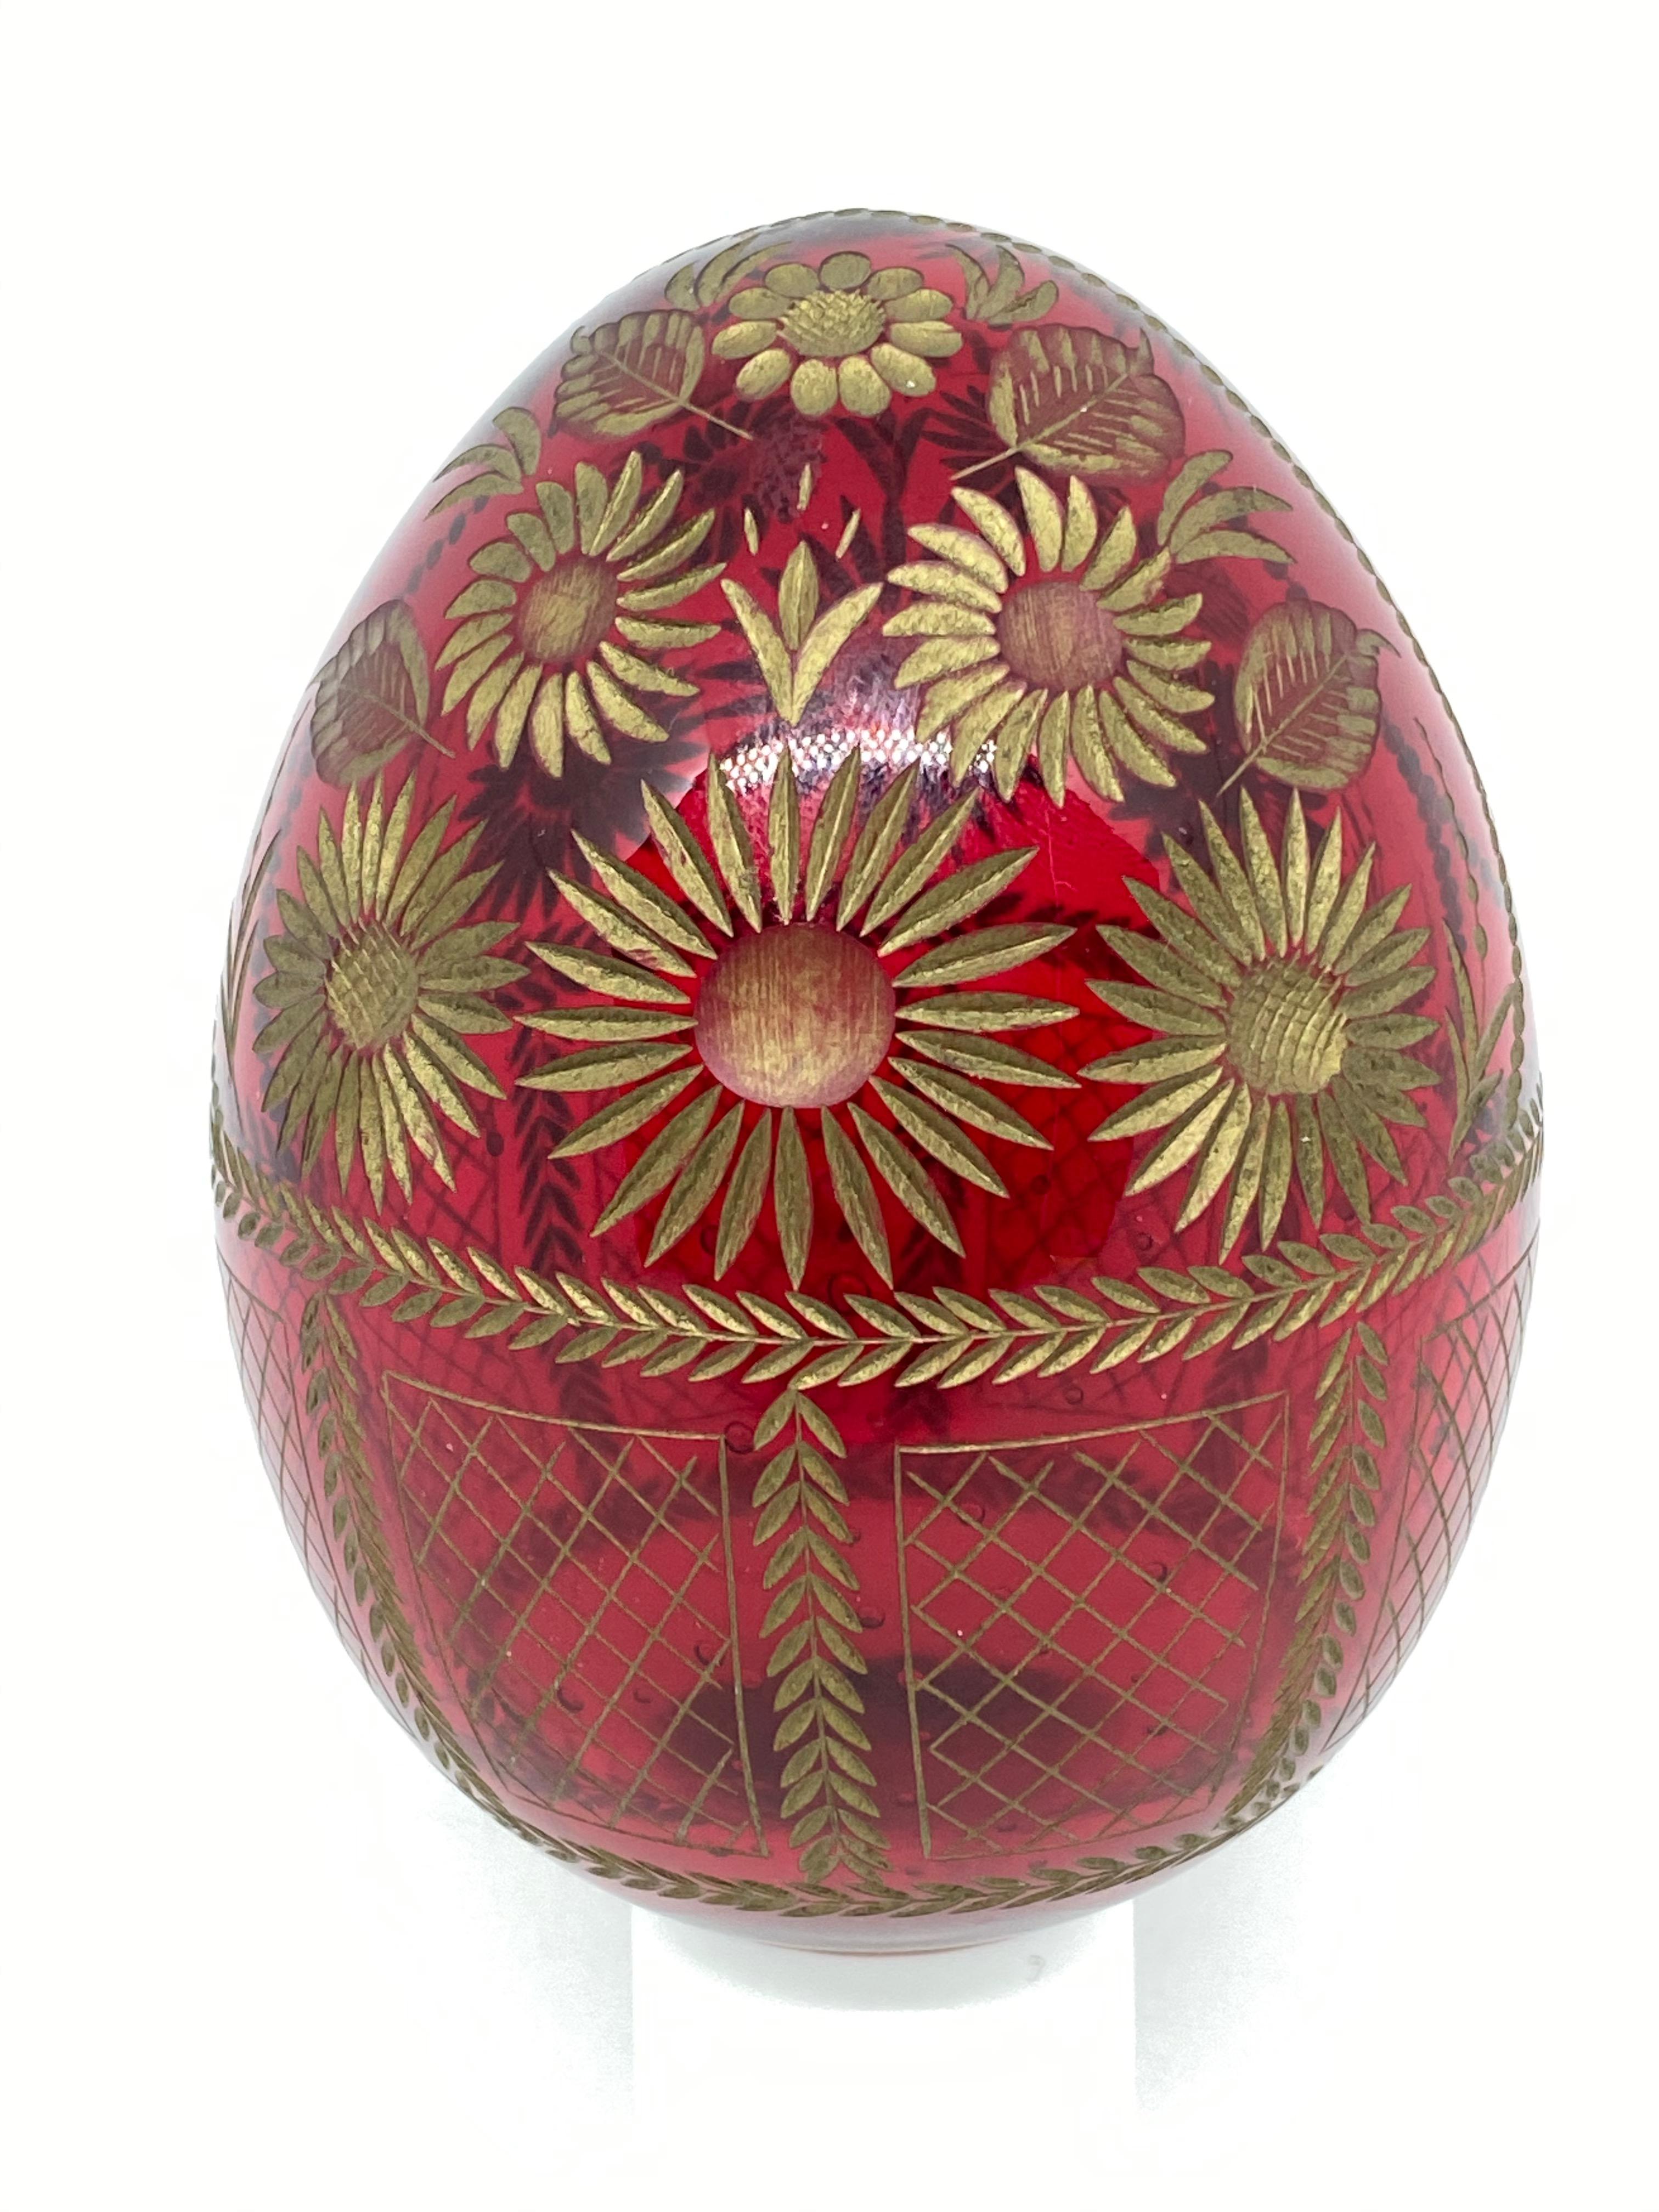 Hand-Crafted Vintage Faberge Russia Style Glass Egg with Etched Russian Folk Art Flowers